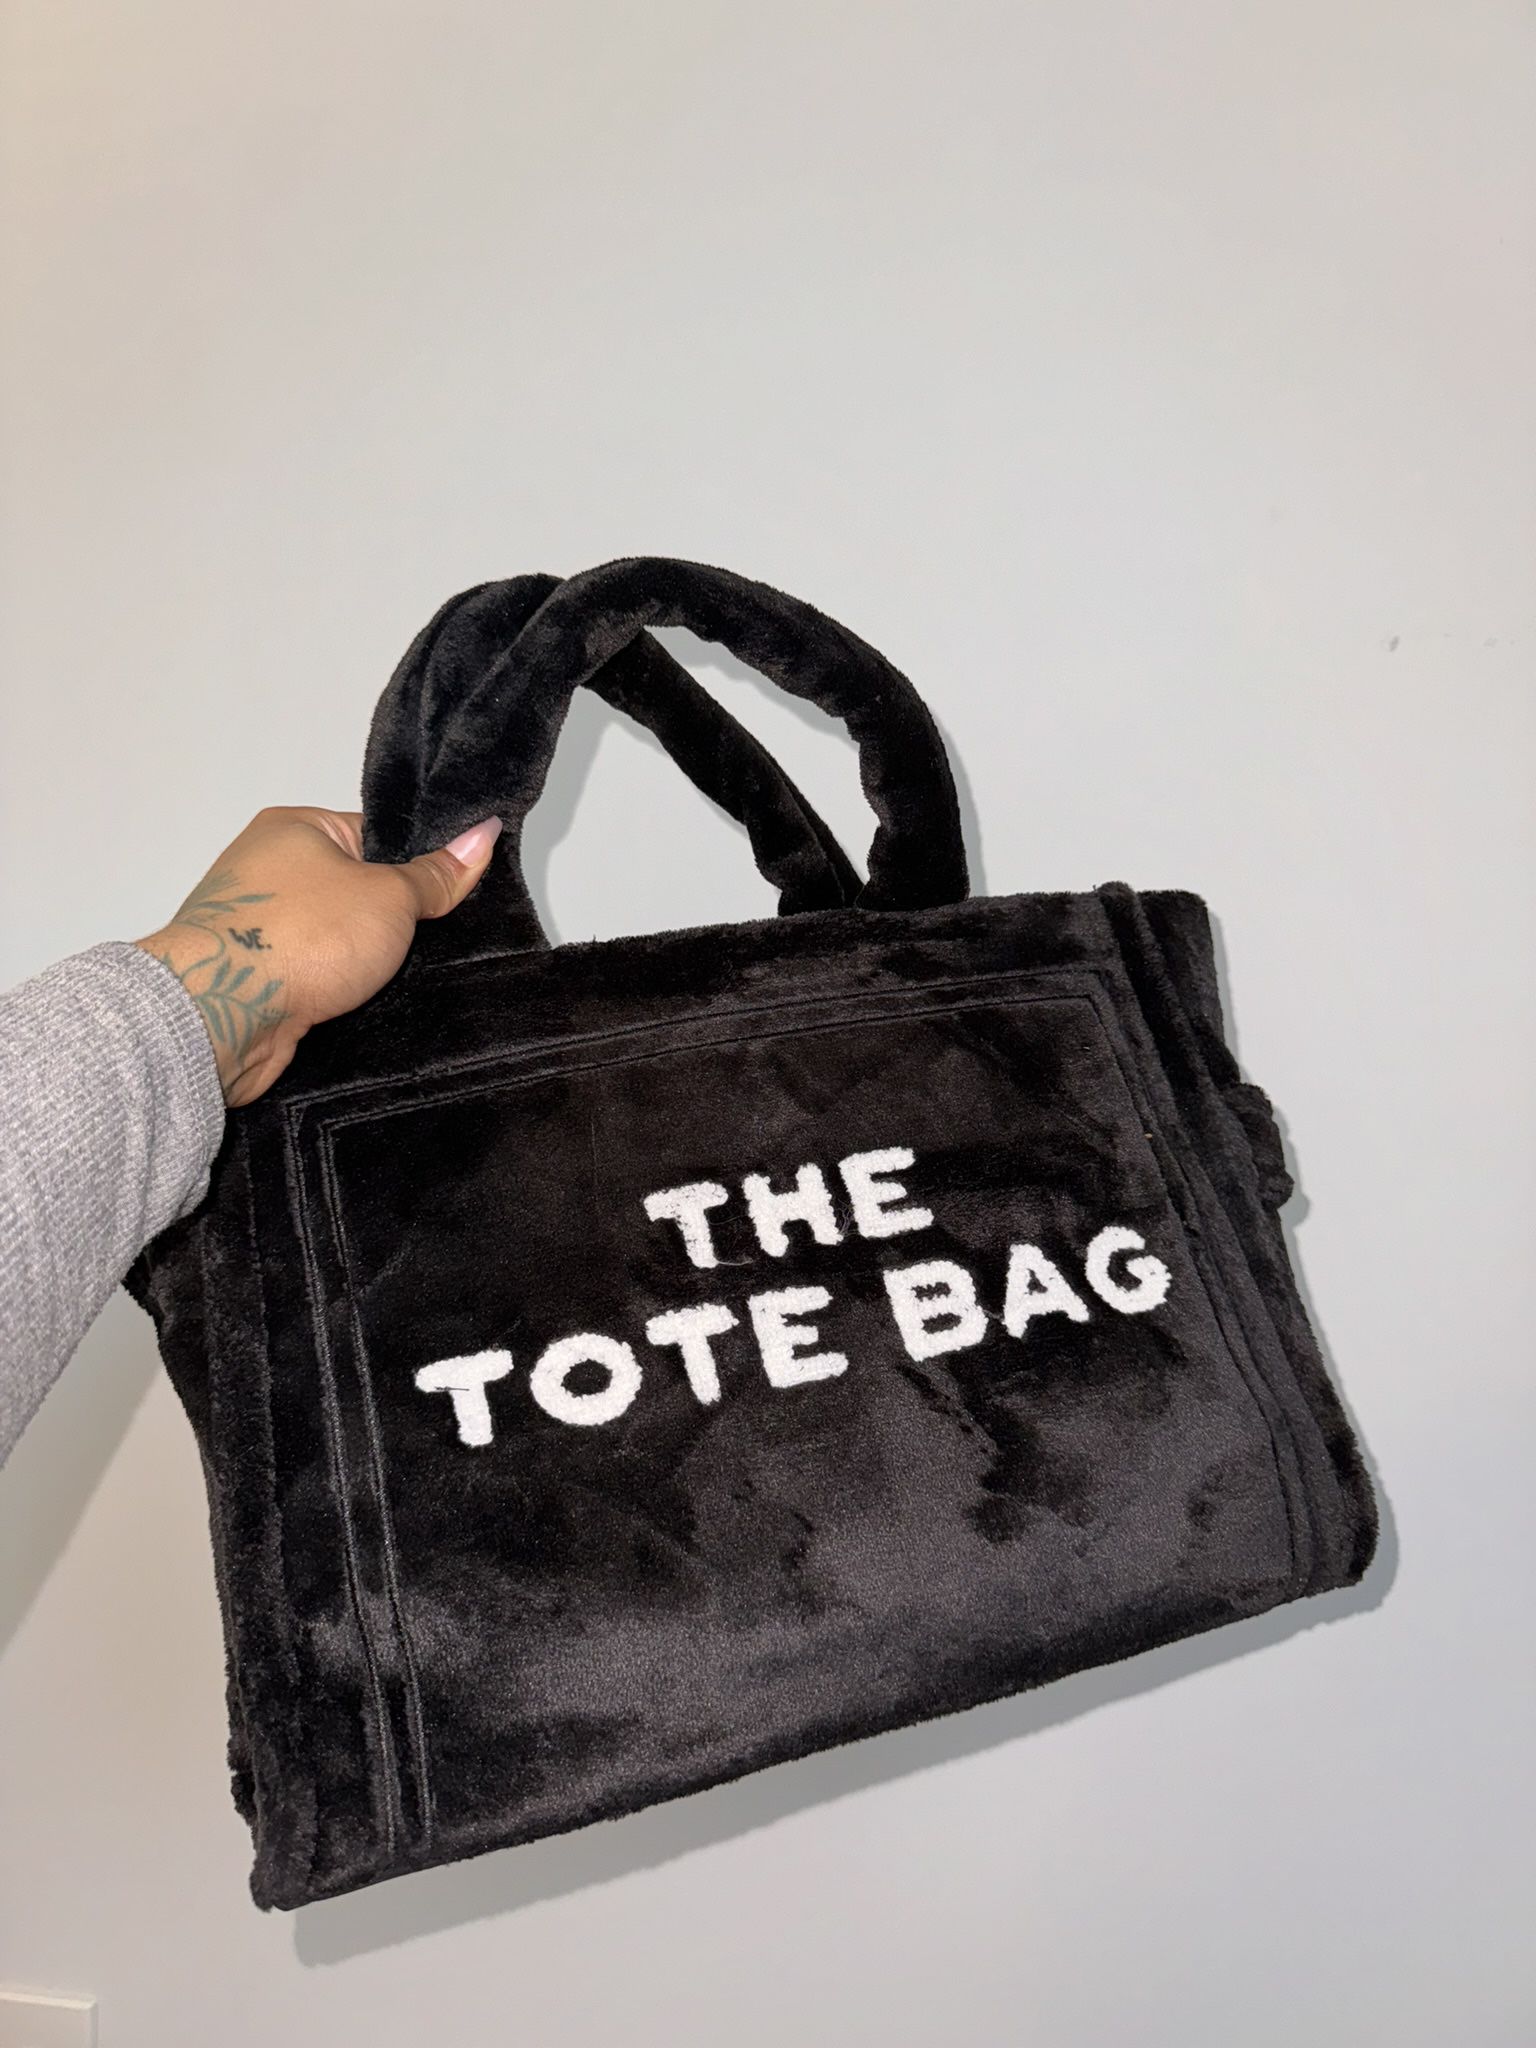 The Tote Bag (not Marc Jacobs)